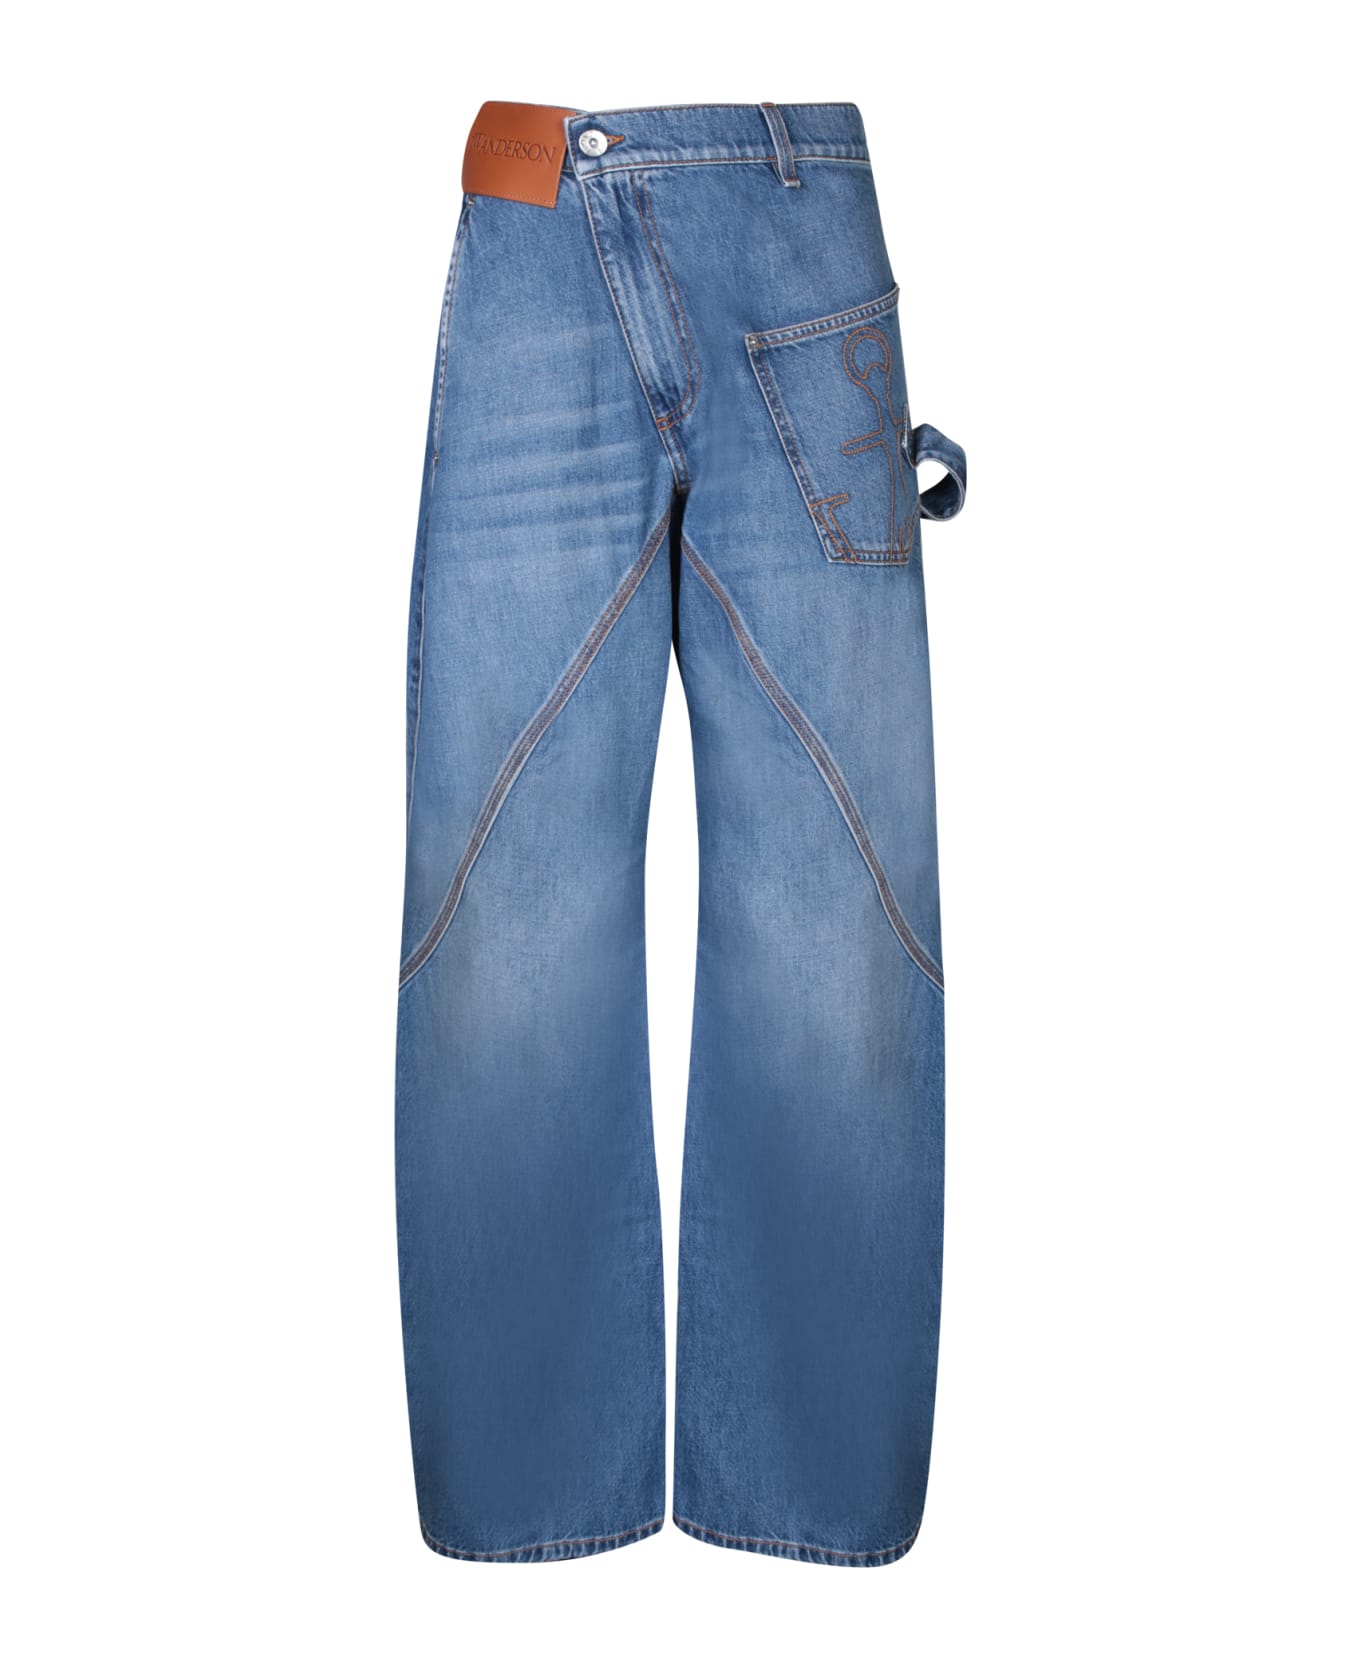 J.W. Anderson 'twisted Workwear' Blue Cotton Jeans - Blue name:463